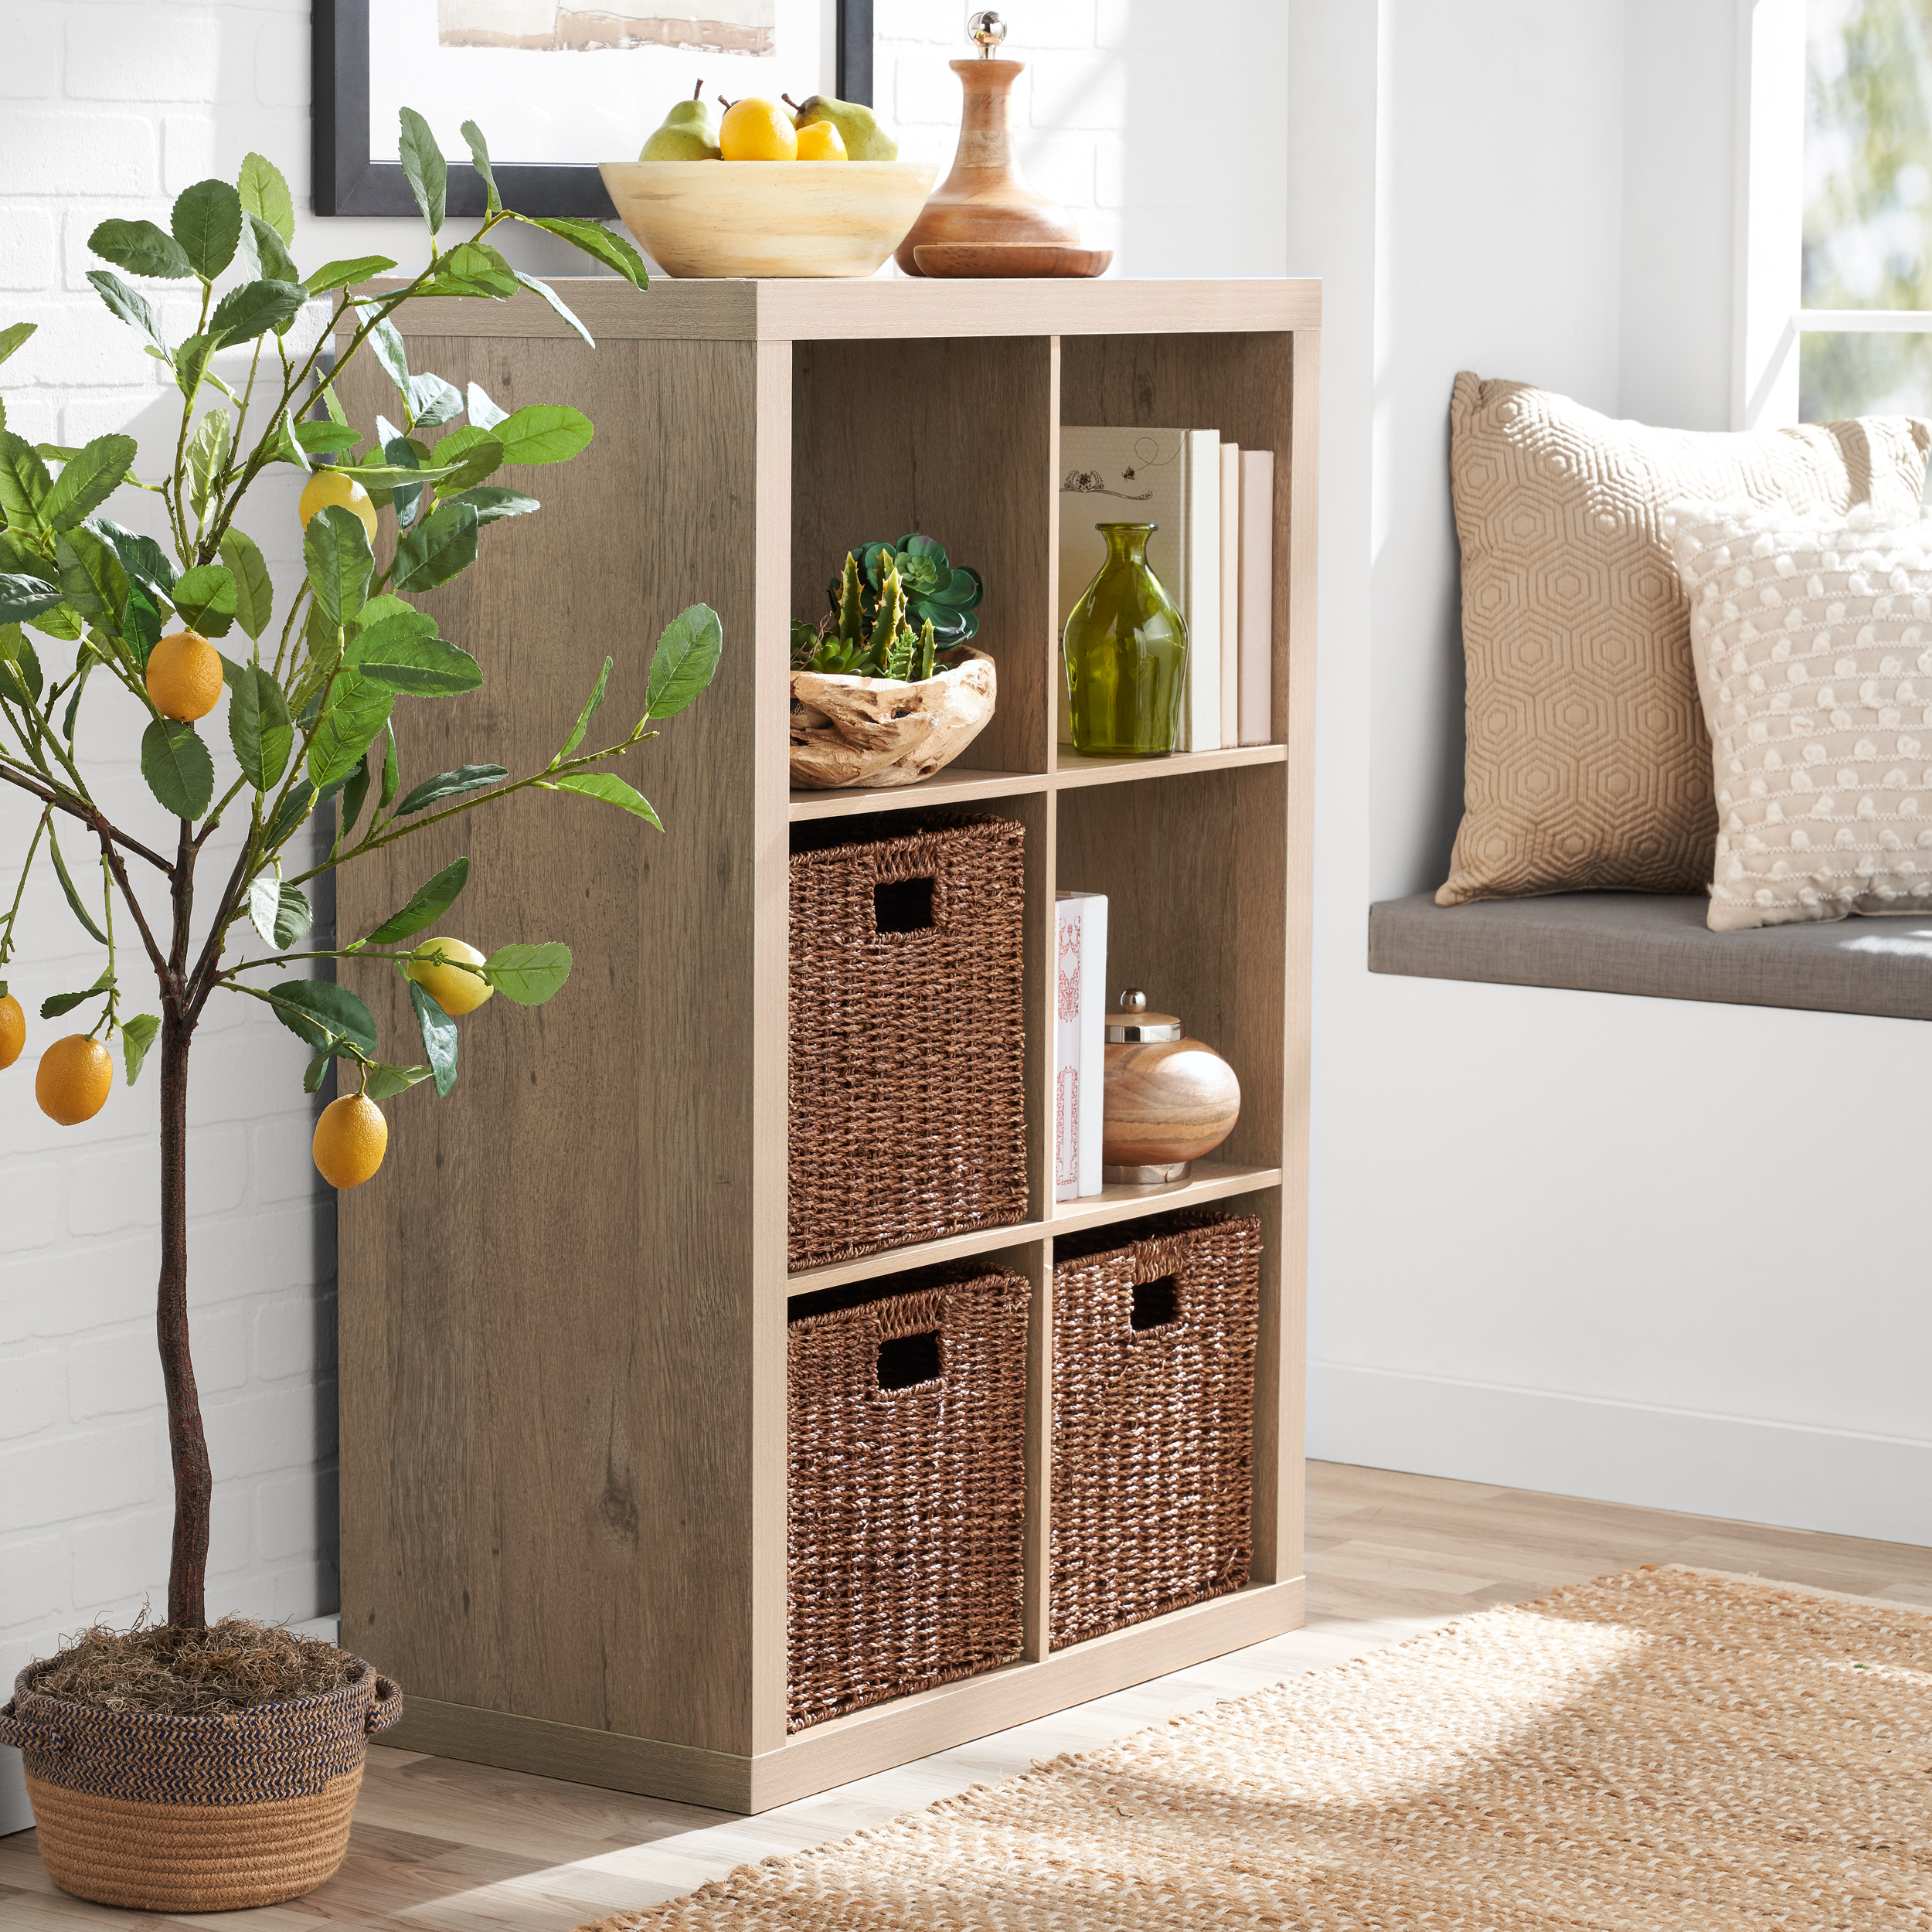 Better Homes & Gardens 6-Cube Storage Organizer, Natural - image 3 of 7